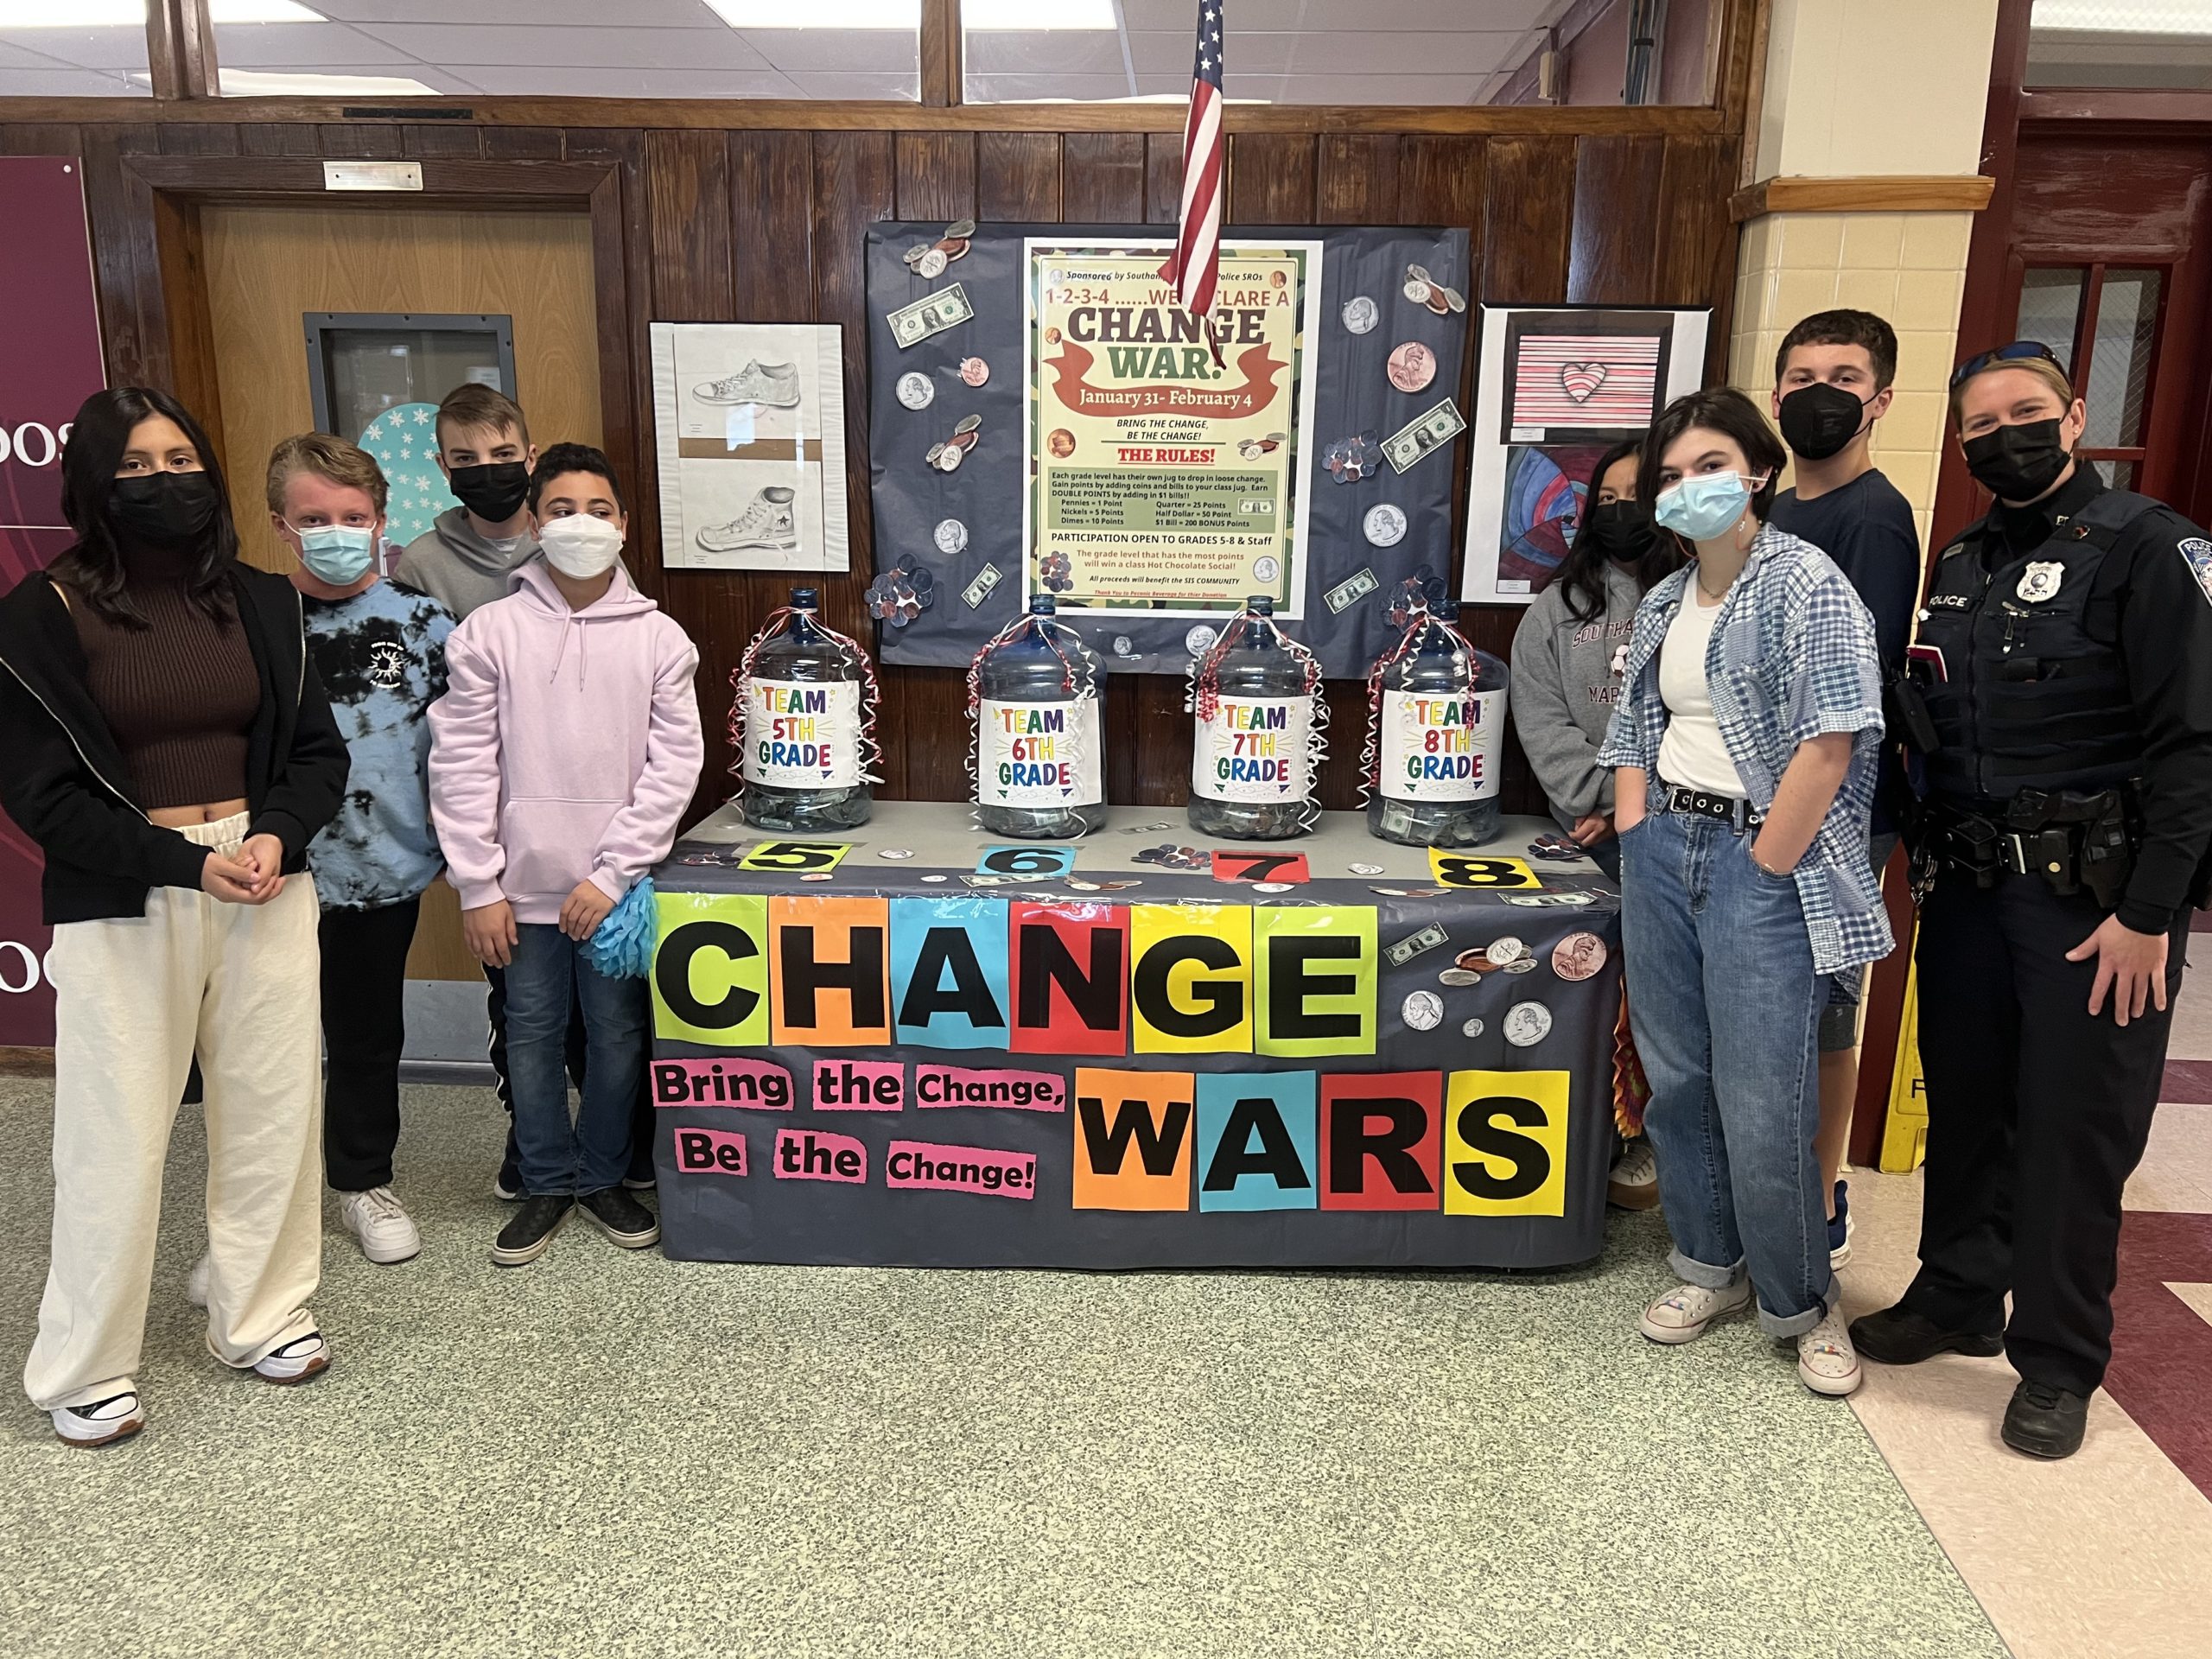 Southampton Intermediate School students raised funds for families in need through a four-day Change Wars fundraiser.